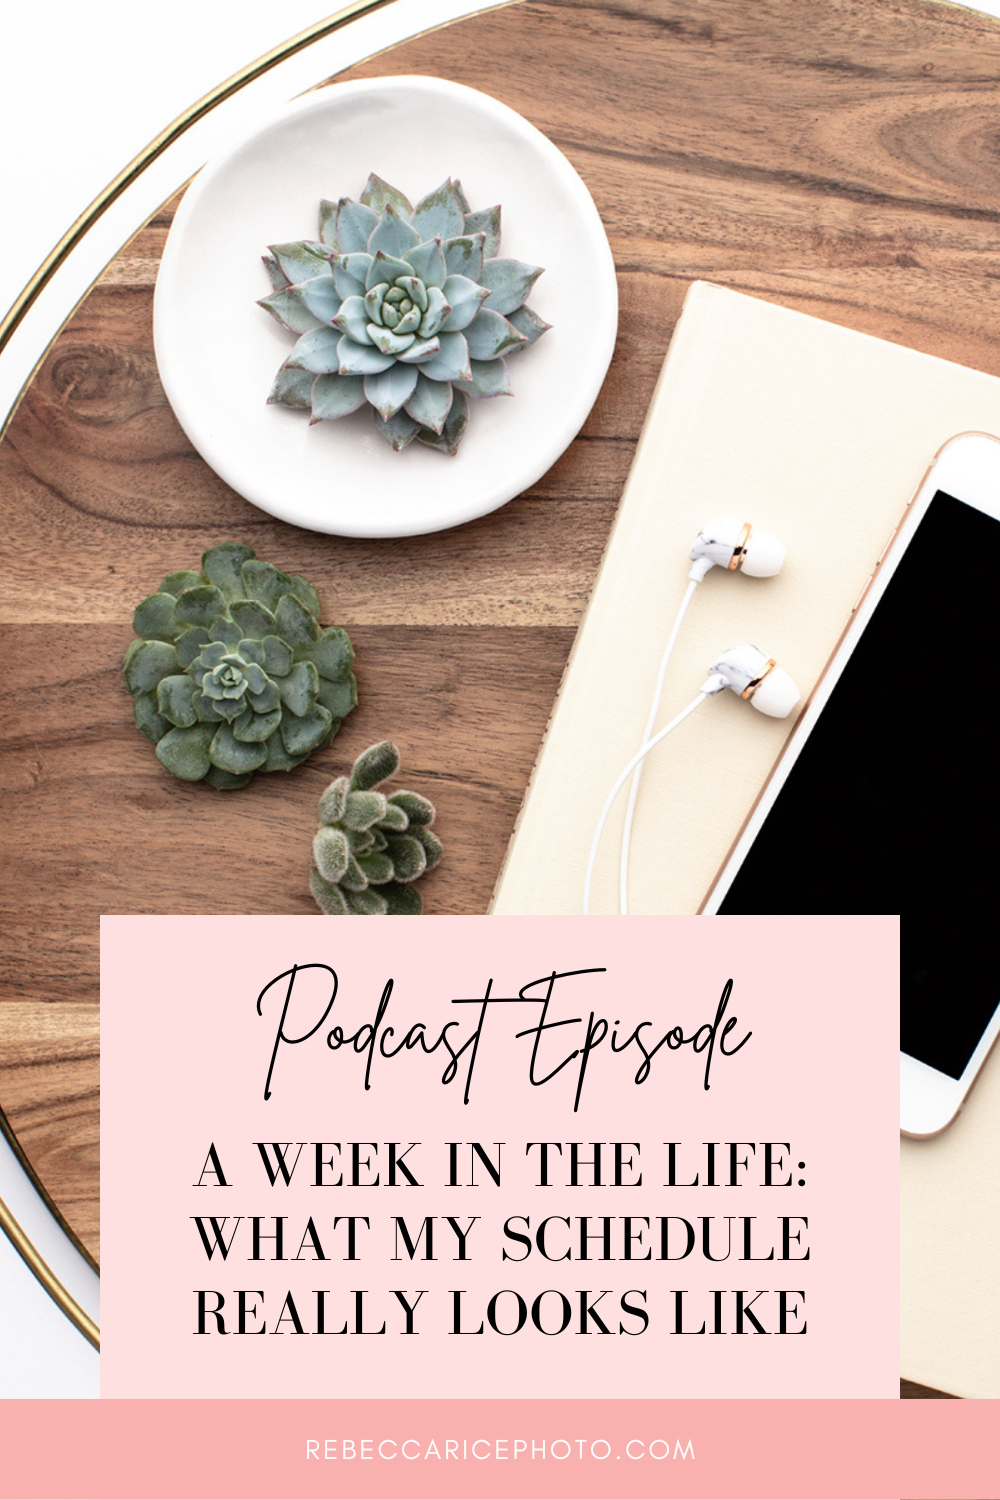 The Business Journey Podcast with Rebecca Rice- A Week in the Life: What My Schedule Really Looks Like